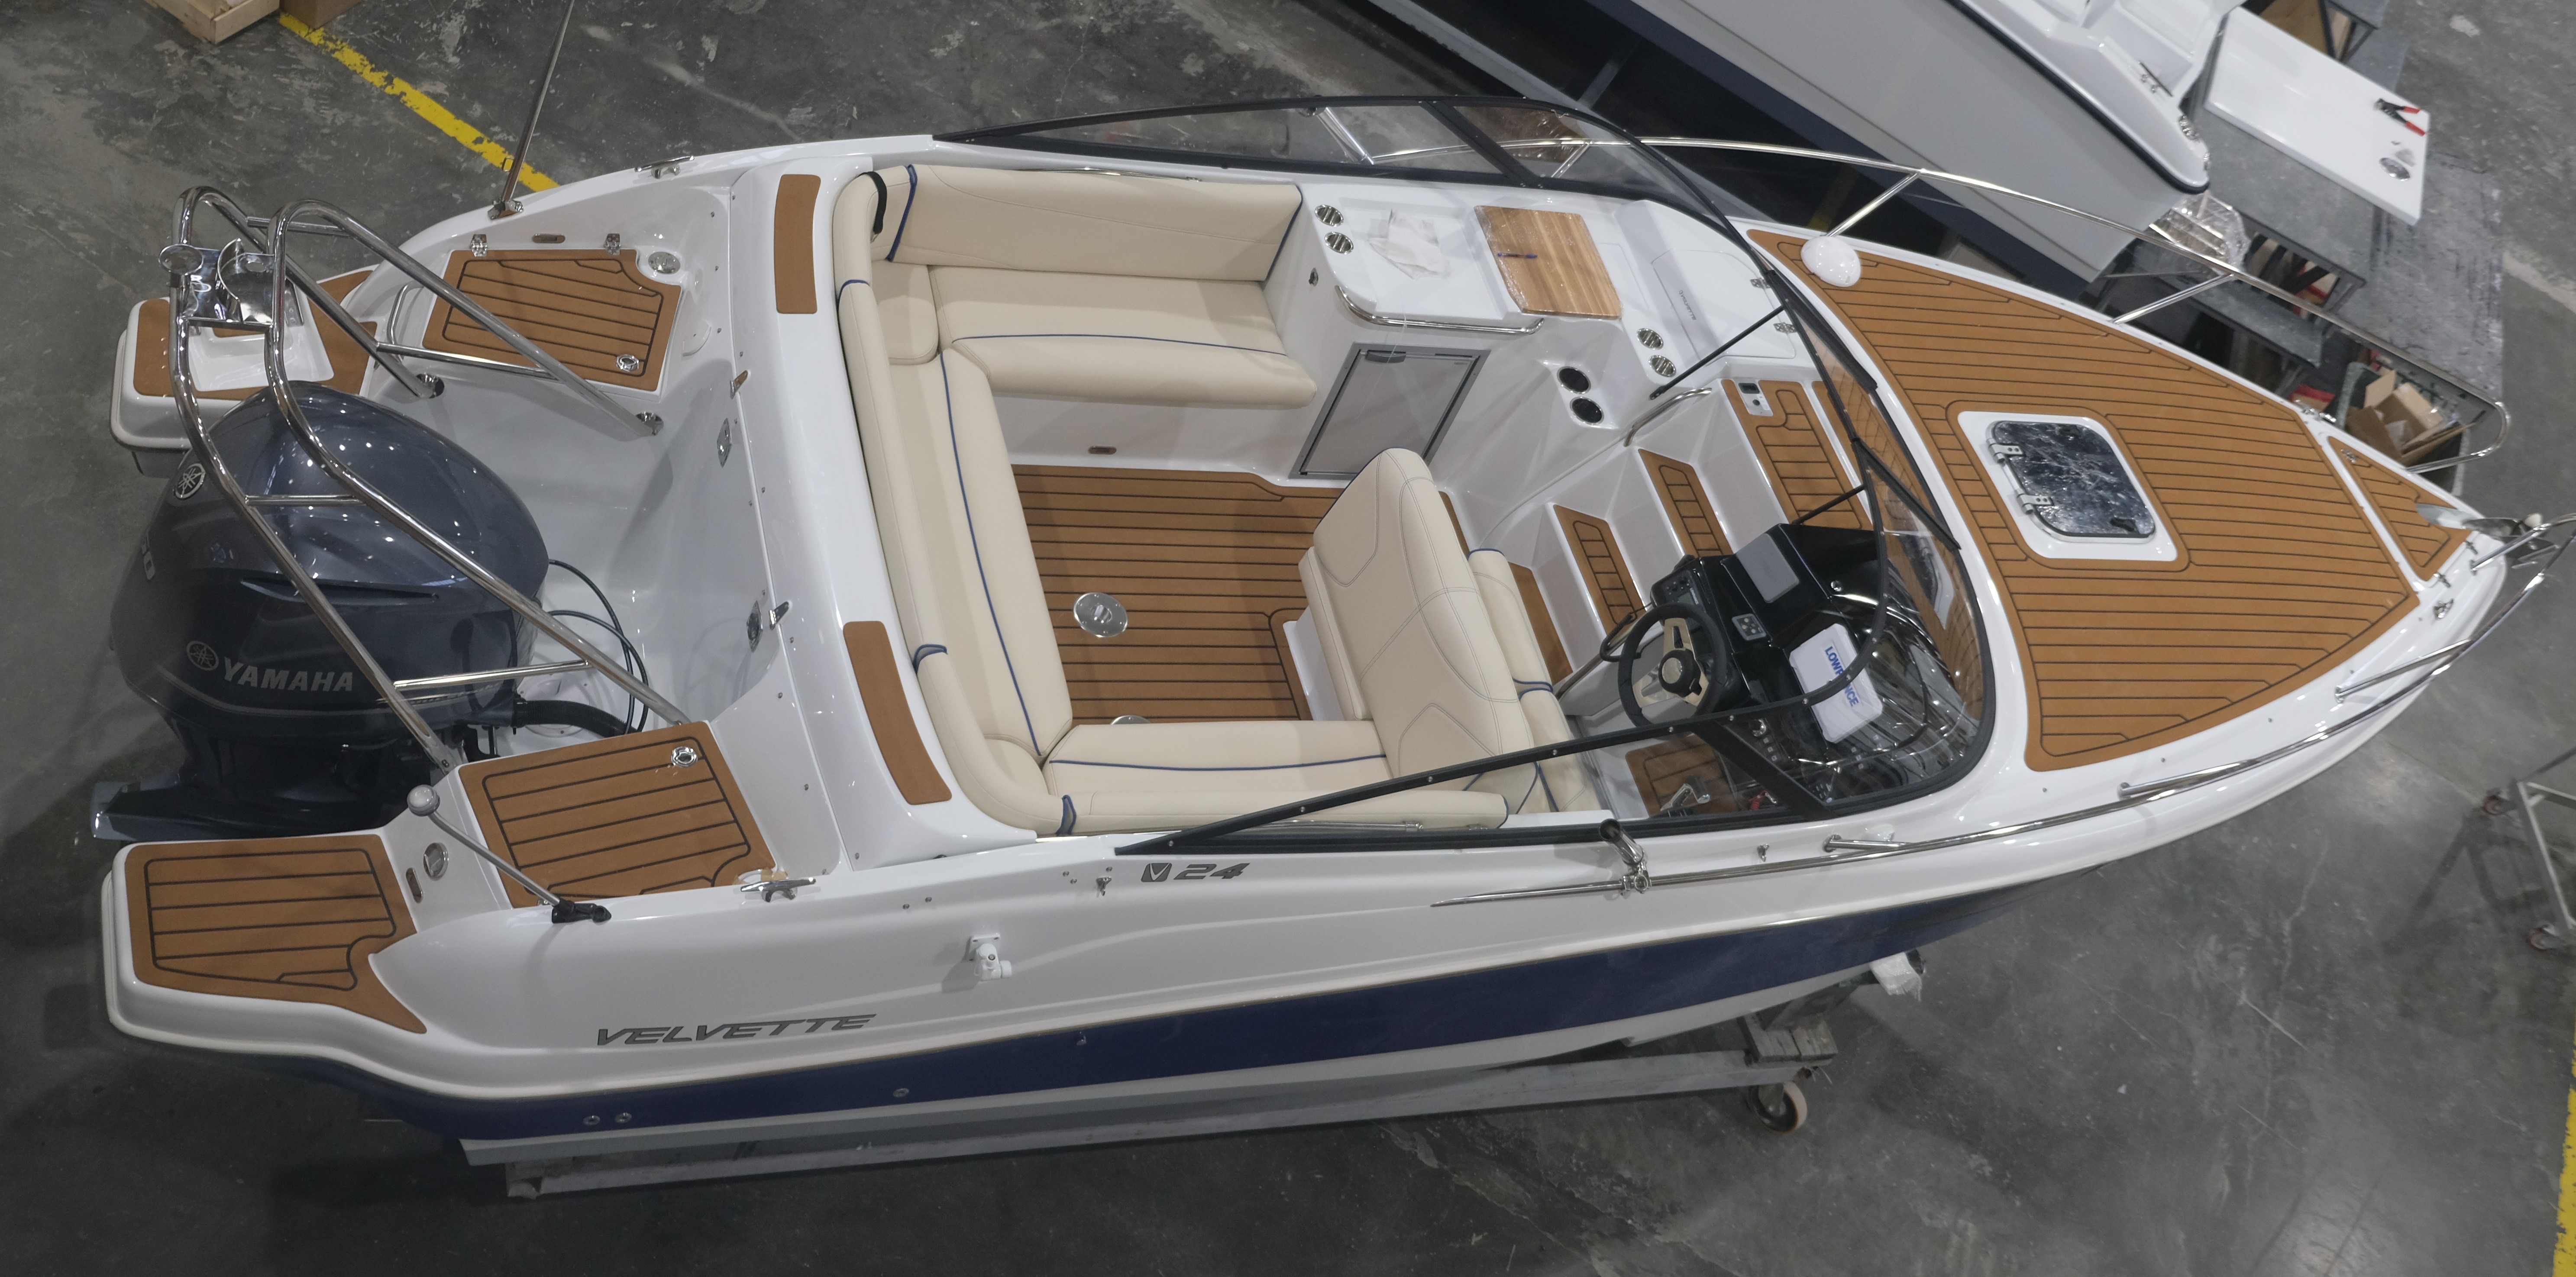 Synthetic teak decking on bow, cockpit, stern deck